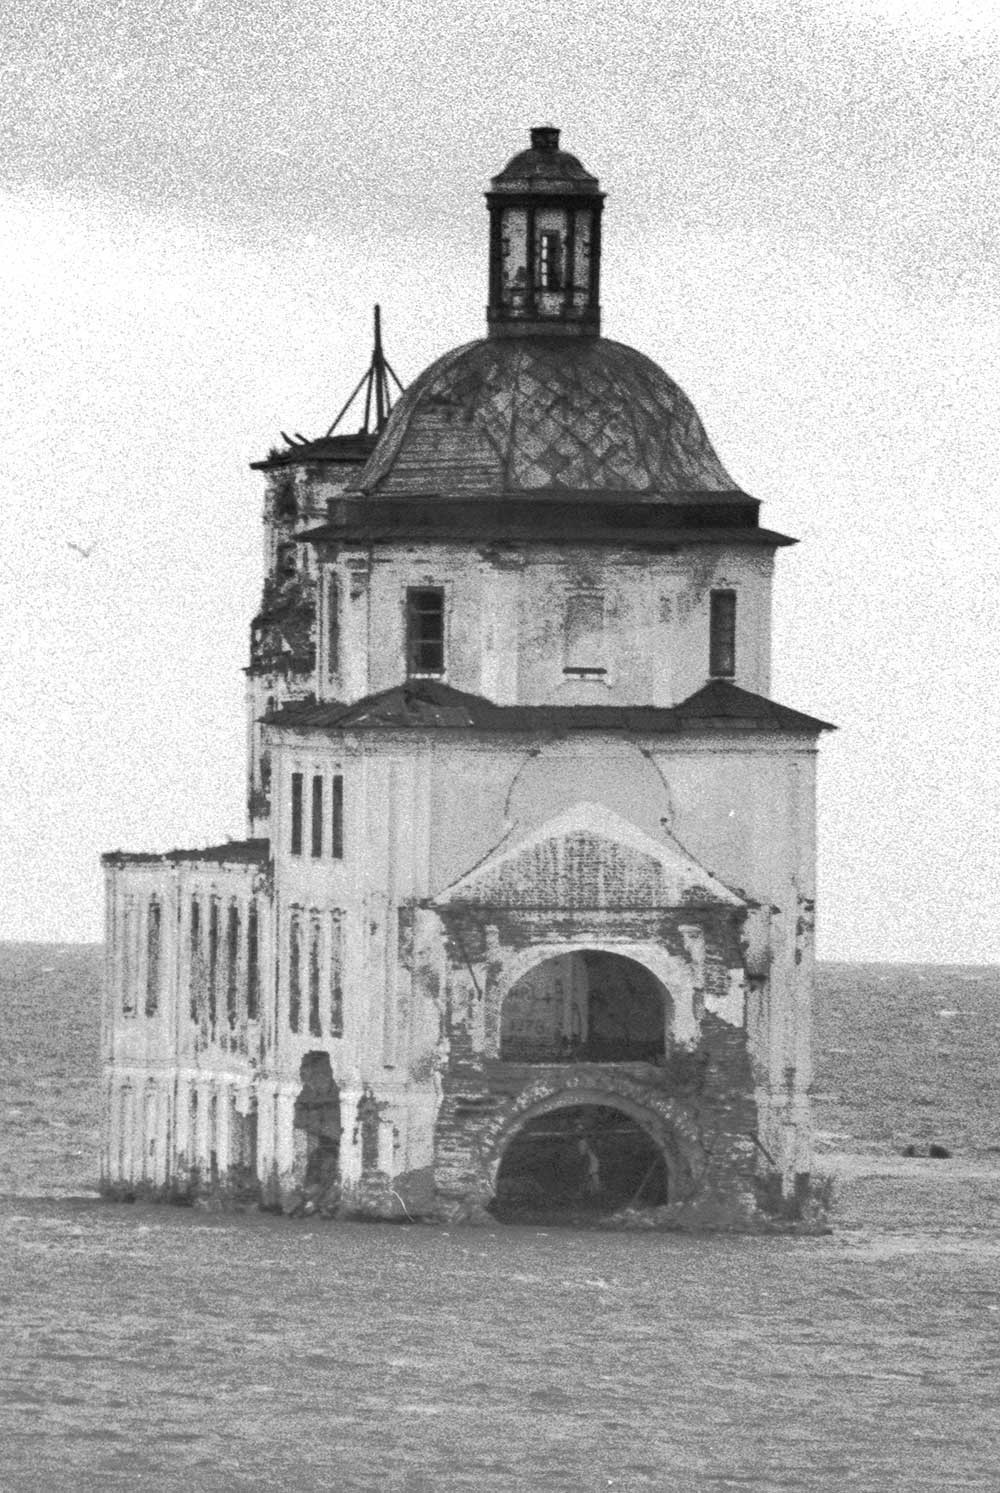 Krokhino. Church of the Nativity of Christ, east view from Sheksna River. August 8, 1991.